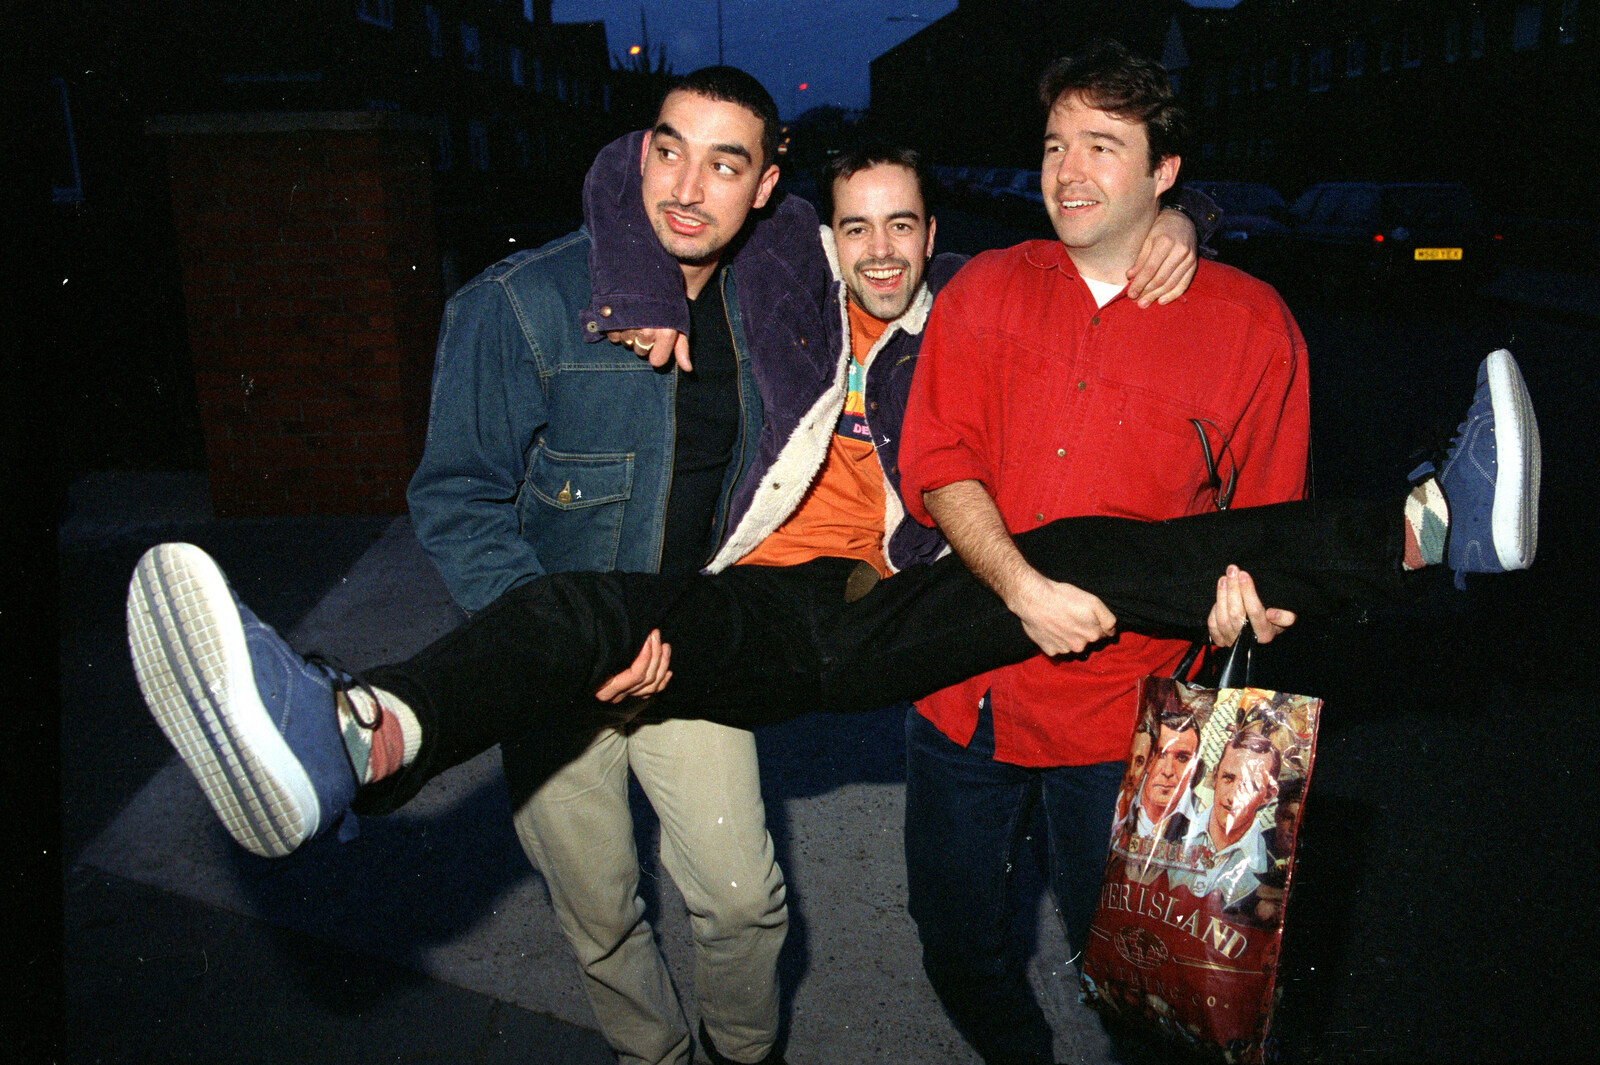 CISU, Los Mexicanos and the Inflatable Woman, Ipswich, Suffolk - 25th April 1996: Orhan and Tim carry Trev down the street